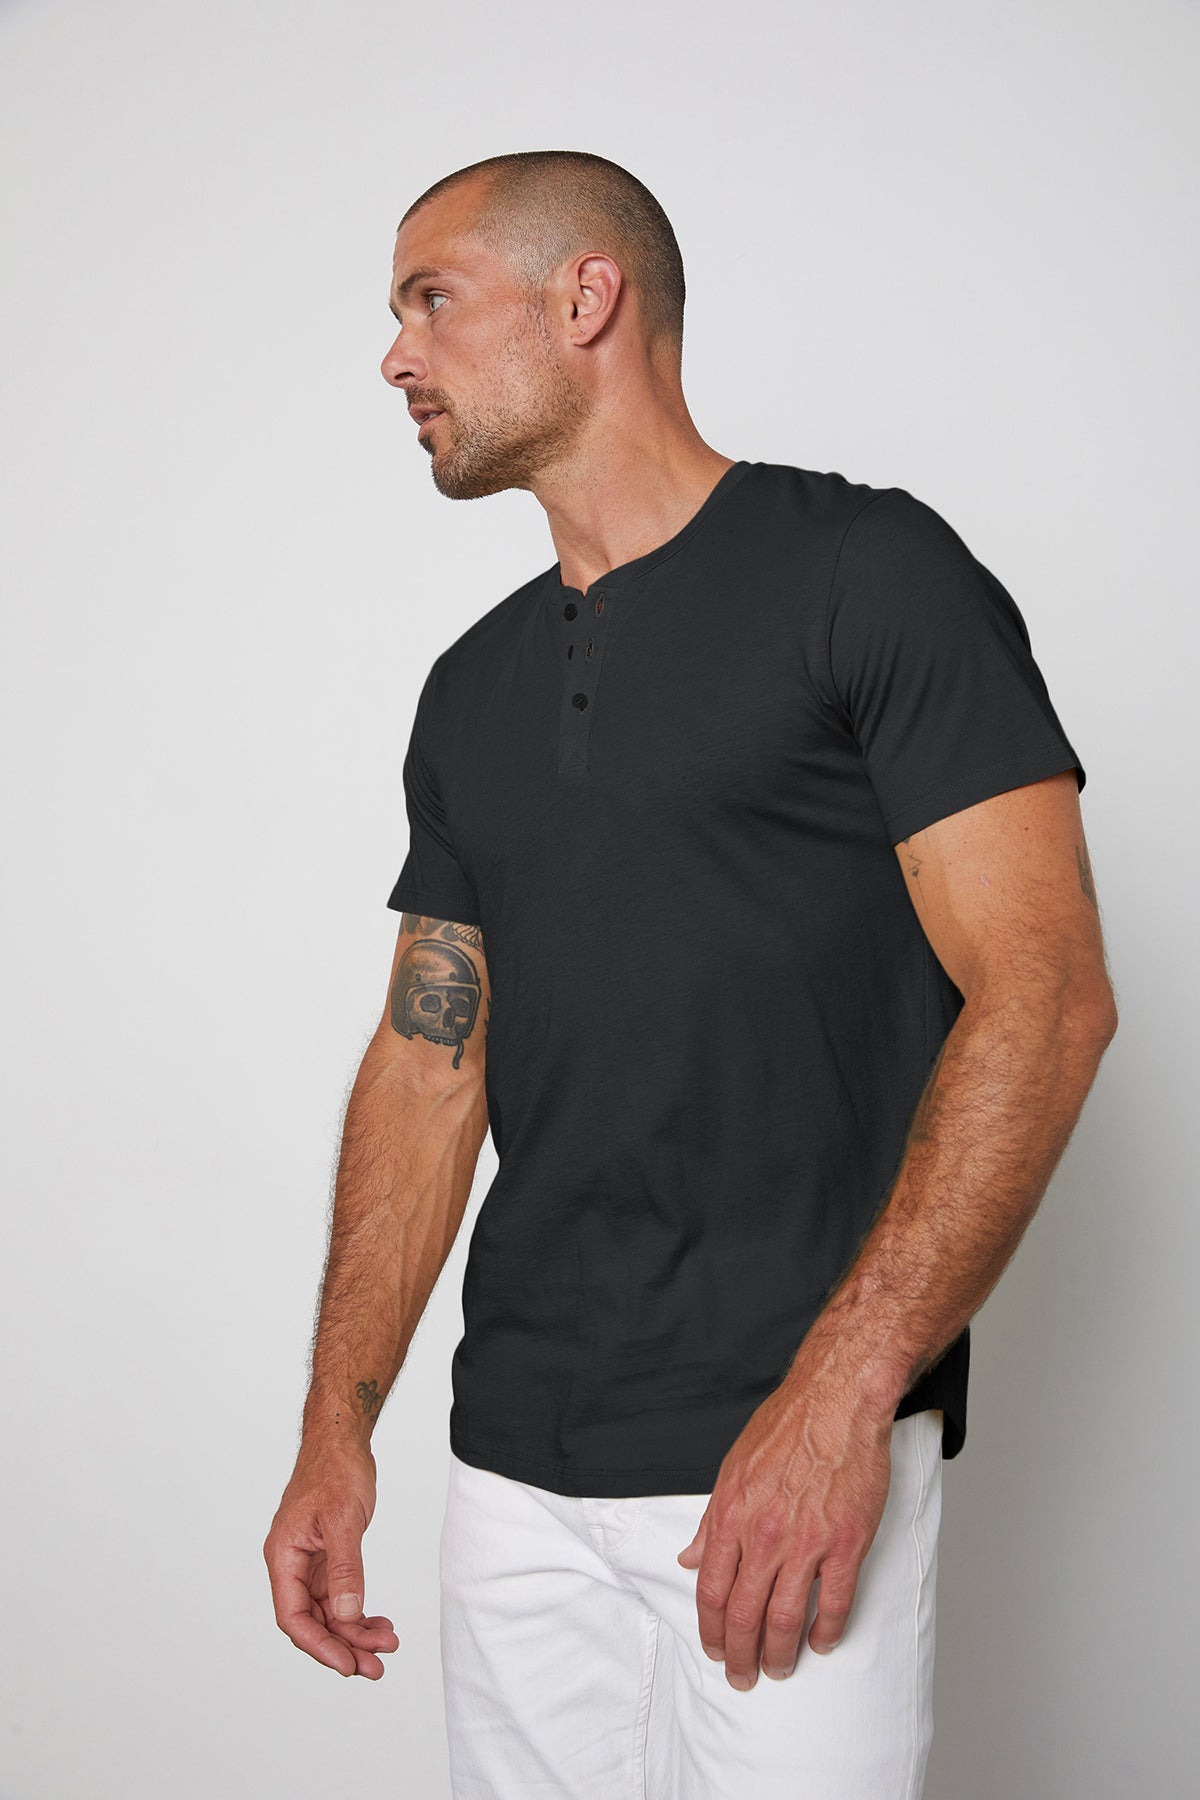 A man in a black Velvet by Graham & Spencer Fulton Henley and white pants, looking to the side, displaying a tattoo on his left arm against a plain background.-24559747432641